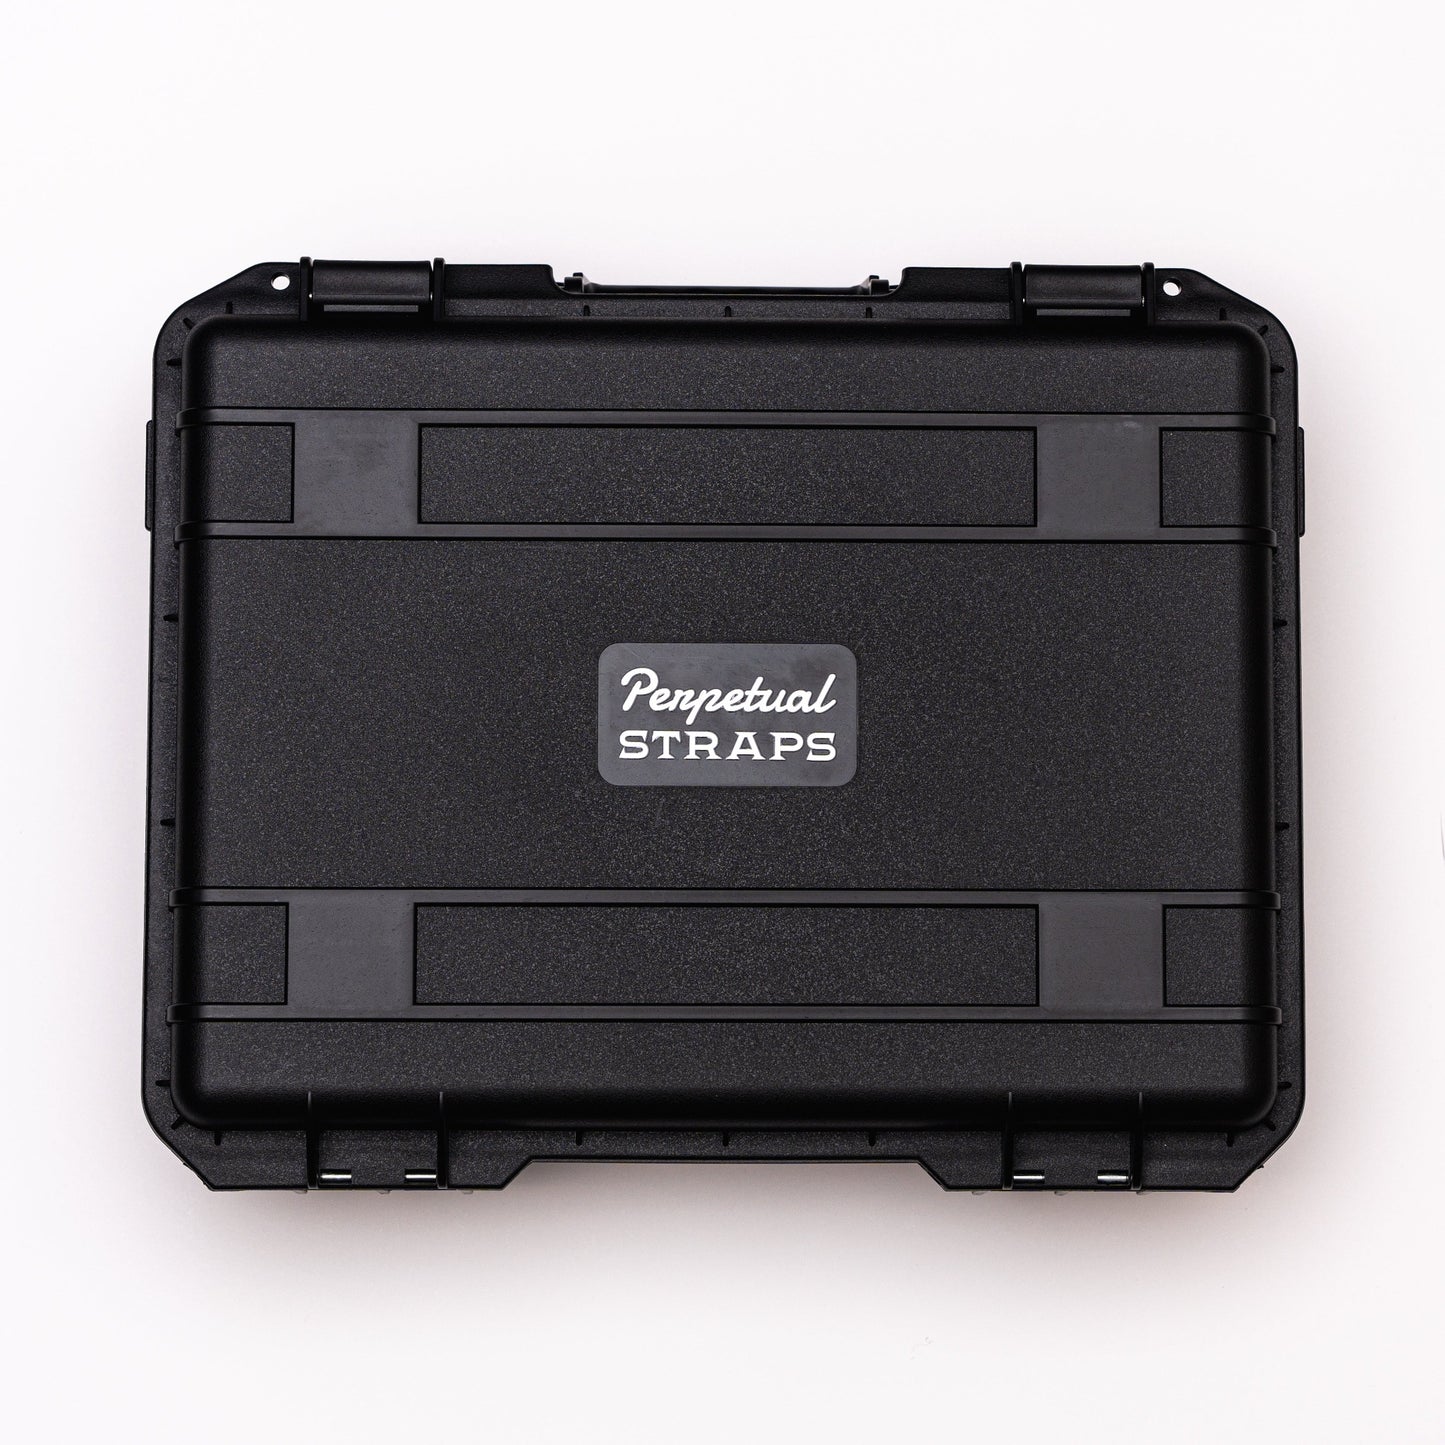 "MISSION COMPLETE" CASE - 11 SLOT WATCH STORAGE BOX for OMEGA X SWATCH MOONSWATCH COLLECTION